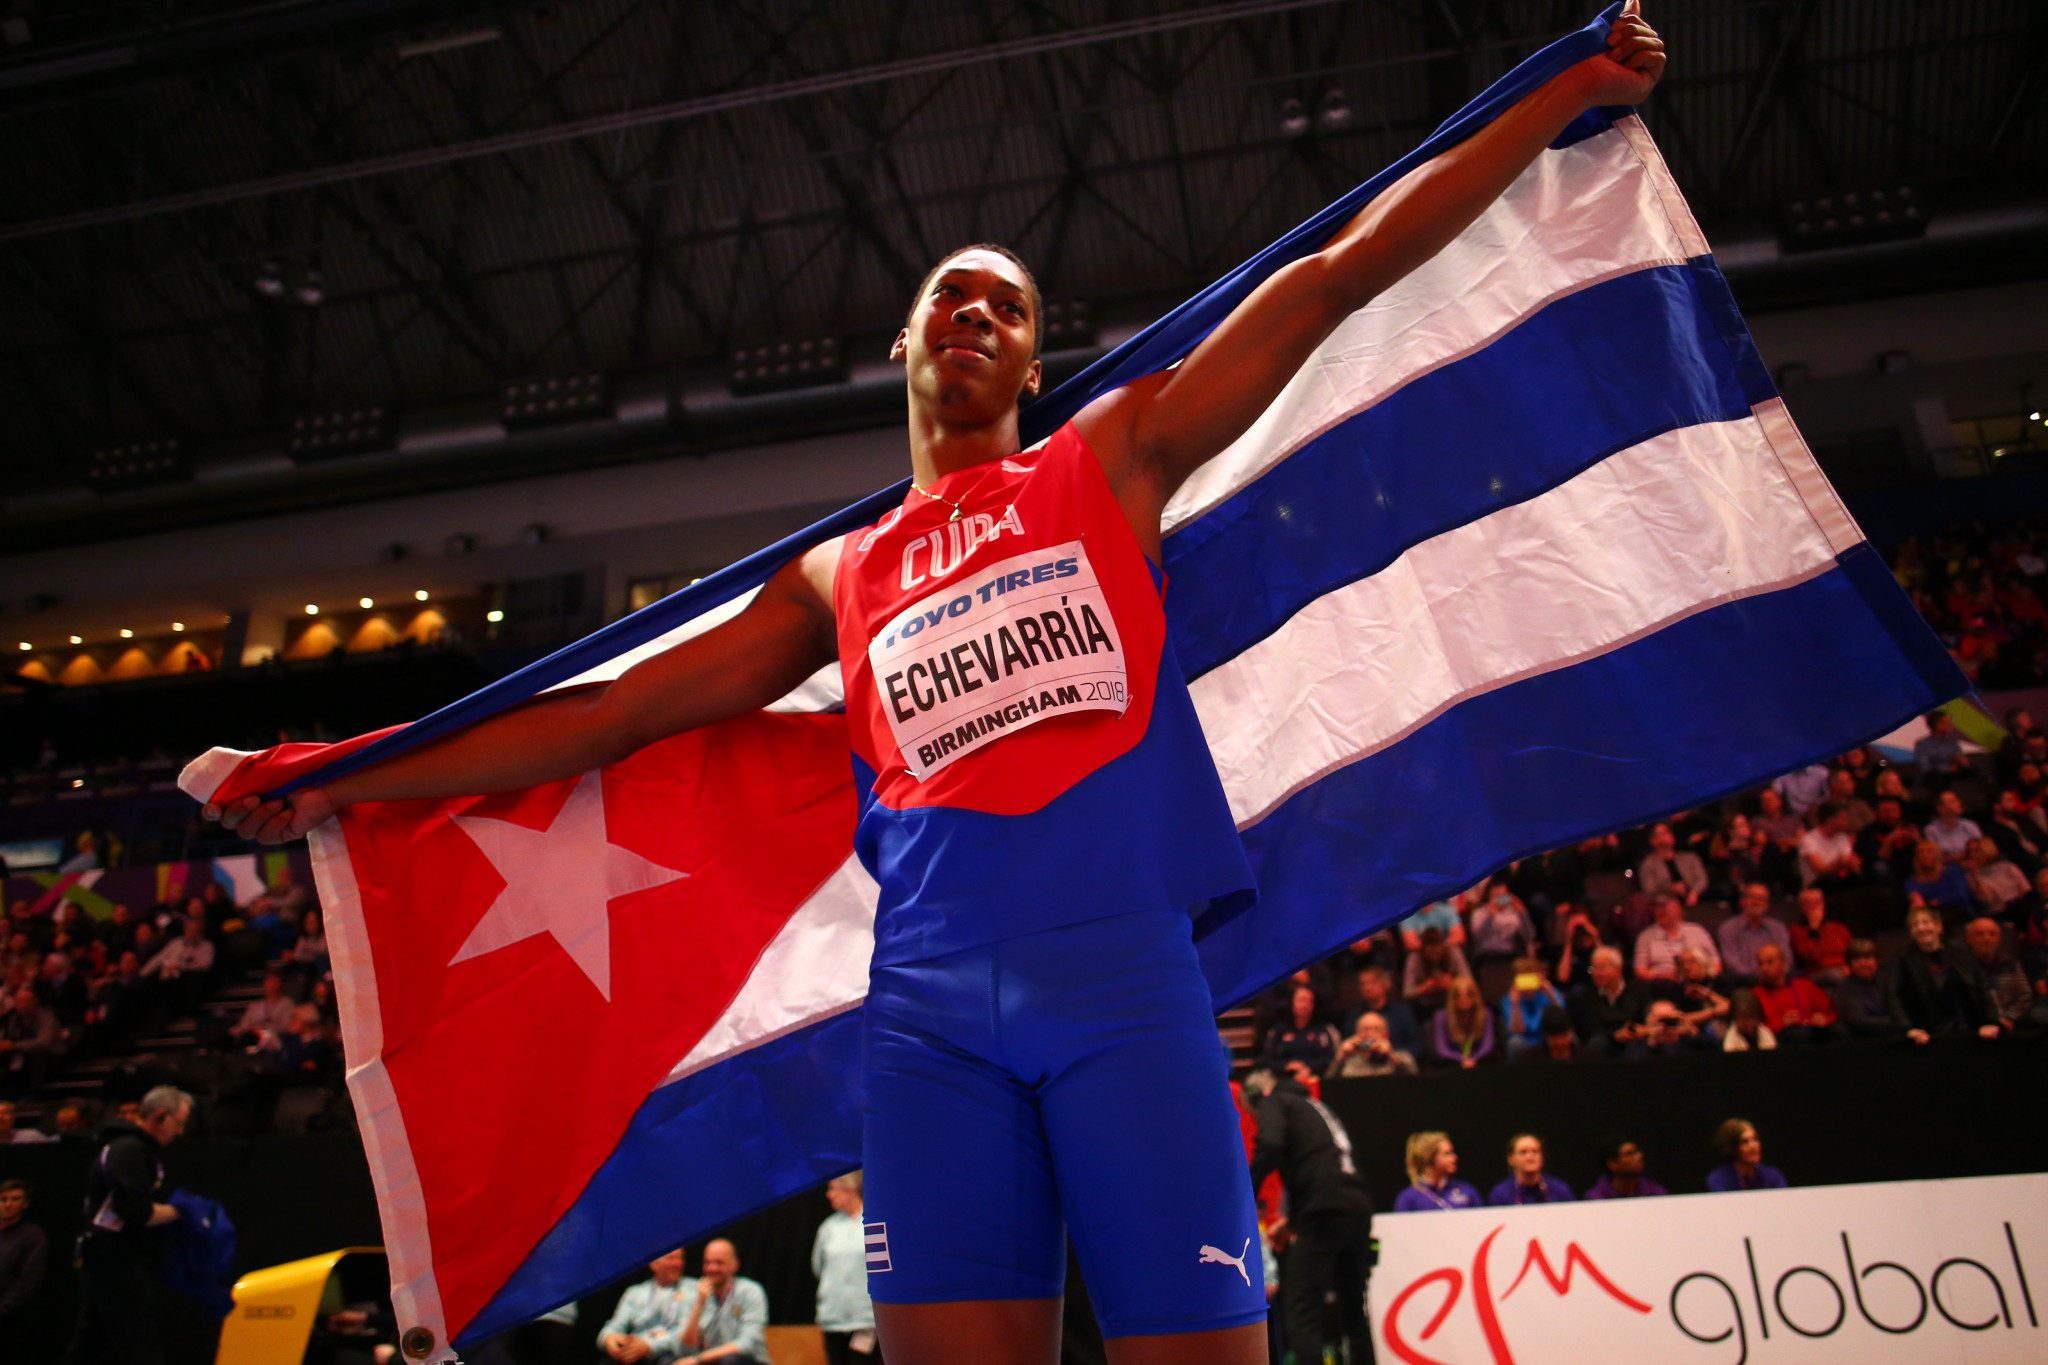 Cuba's 19-year-old Juan Miguel Echevarria won an extraordinary World Indoor long jump gold at Arena Birmingham ©Getty Images